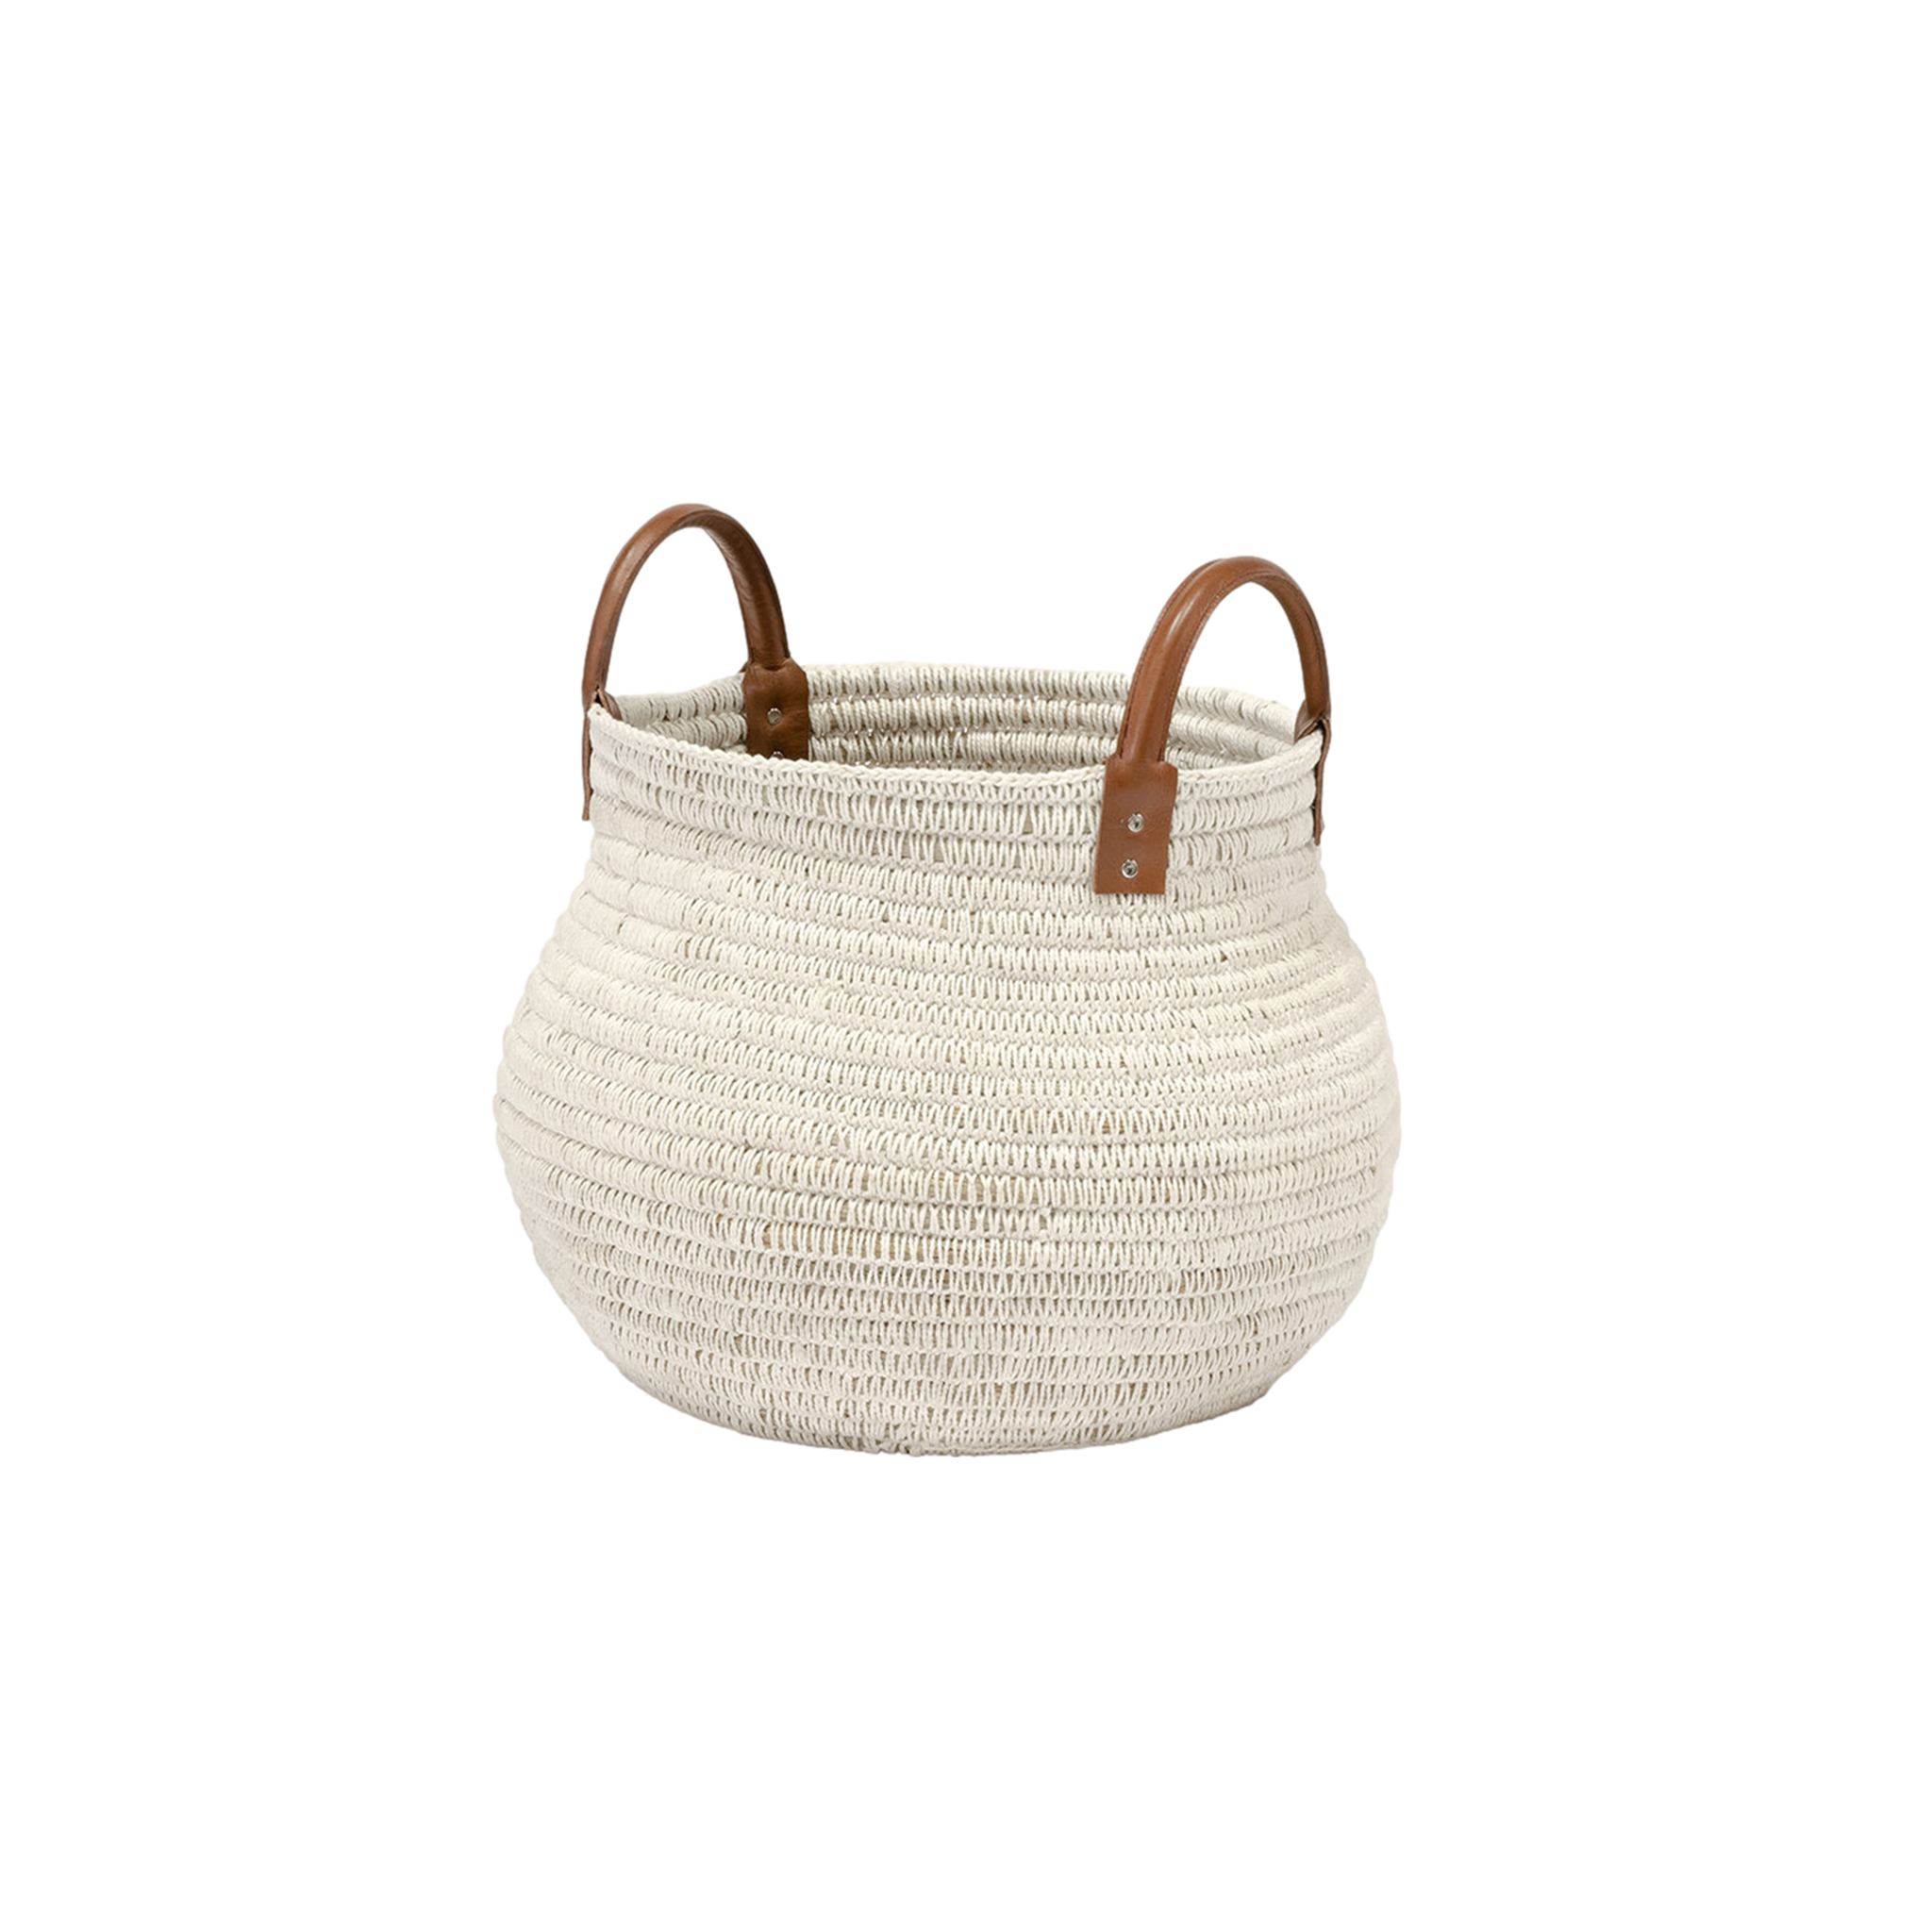 Cairo Basket in White (Small)